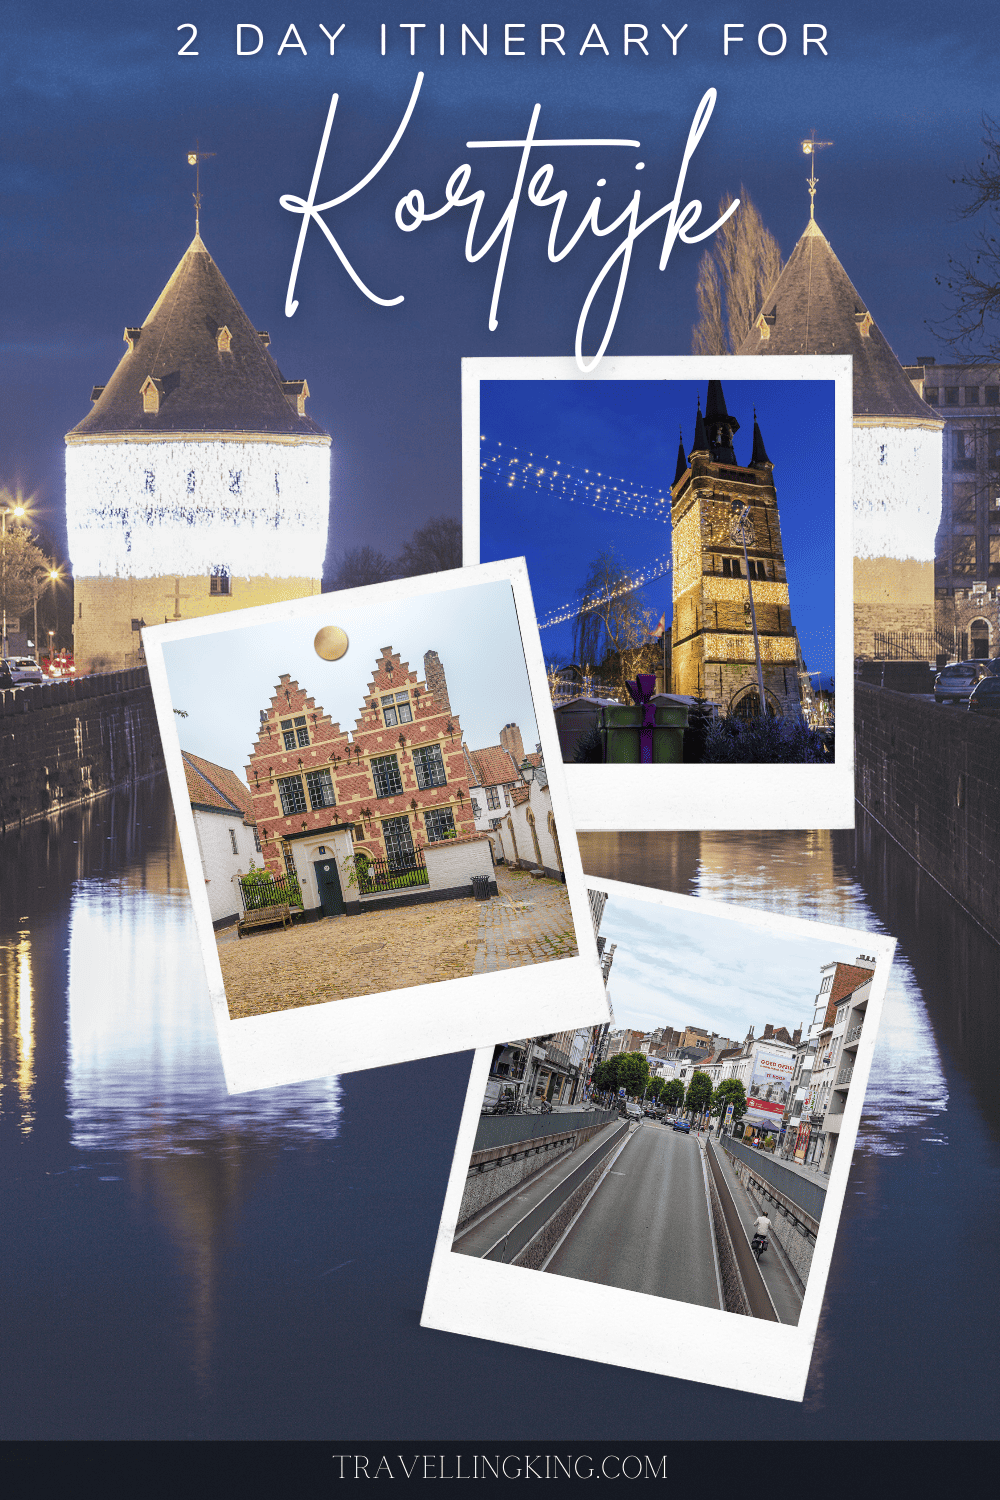 48 Hours in Kortrijk - 2 Day Itinerary